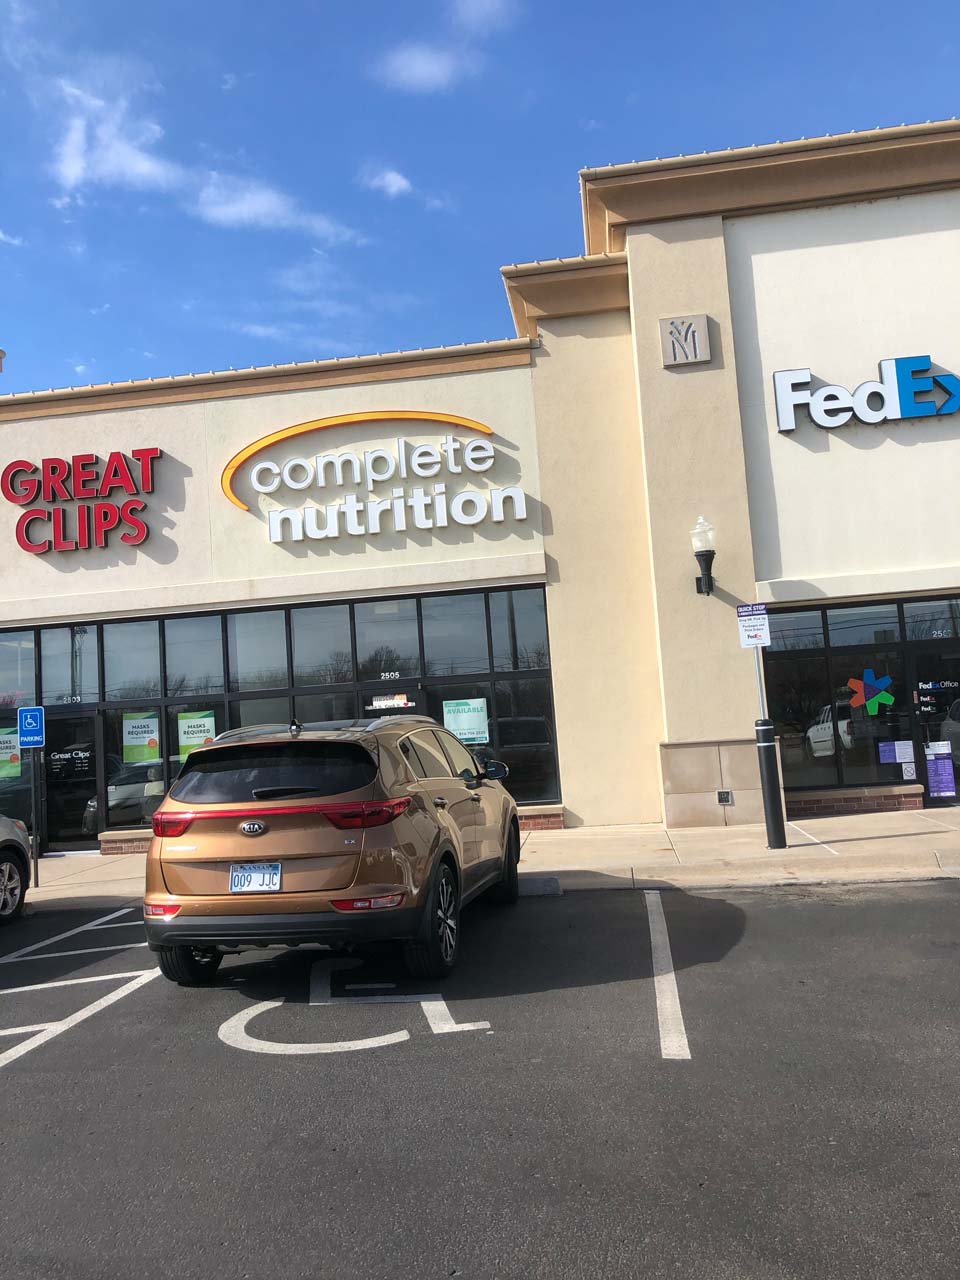 Exterior of Complete Nutrition, Great Clips and FedEx